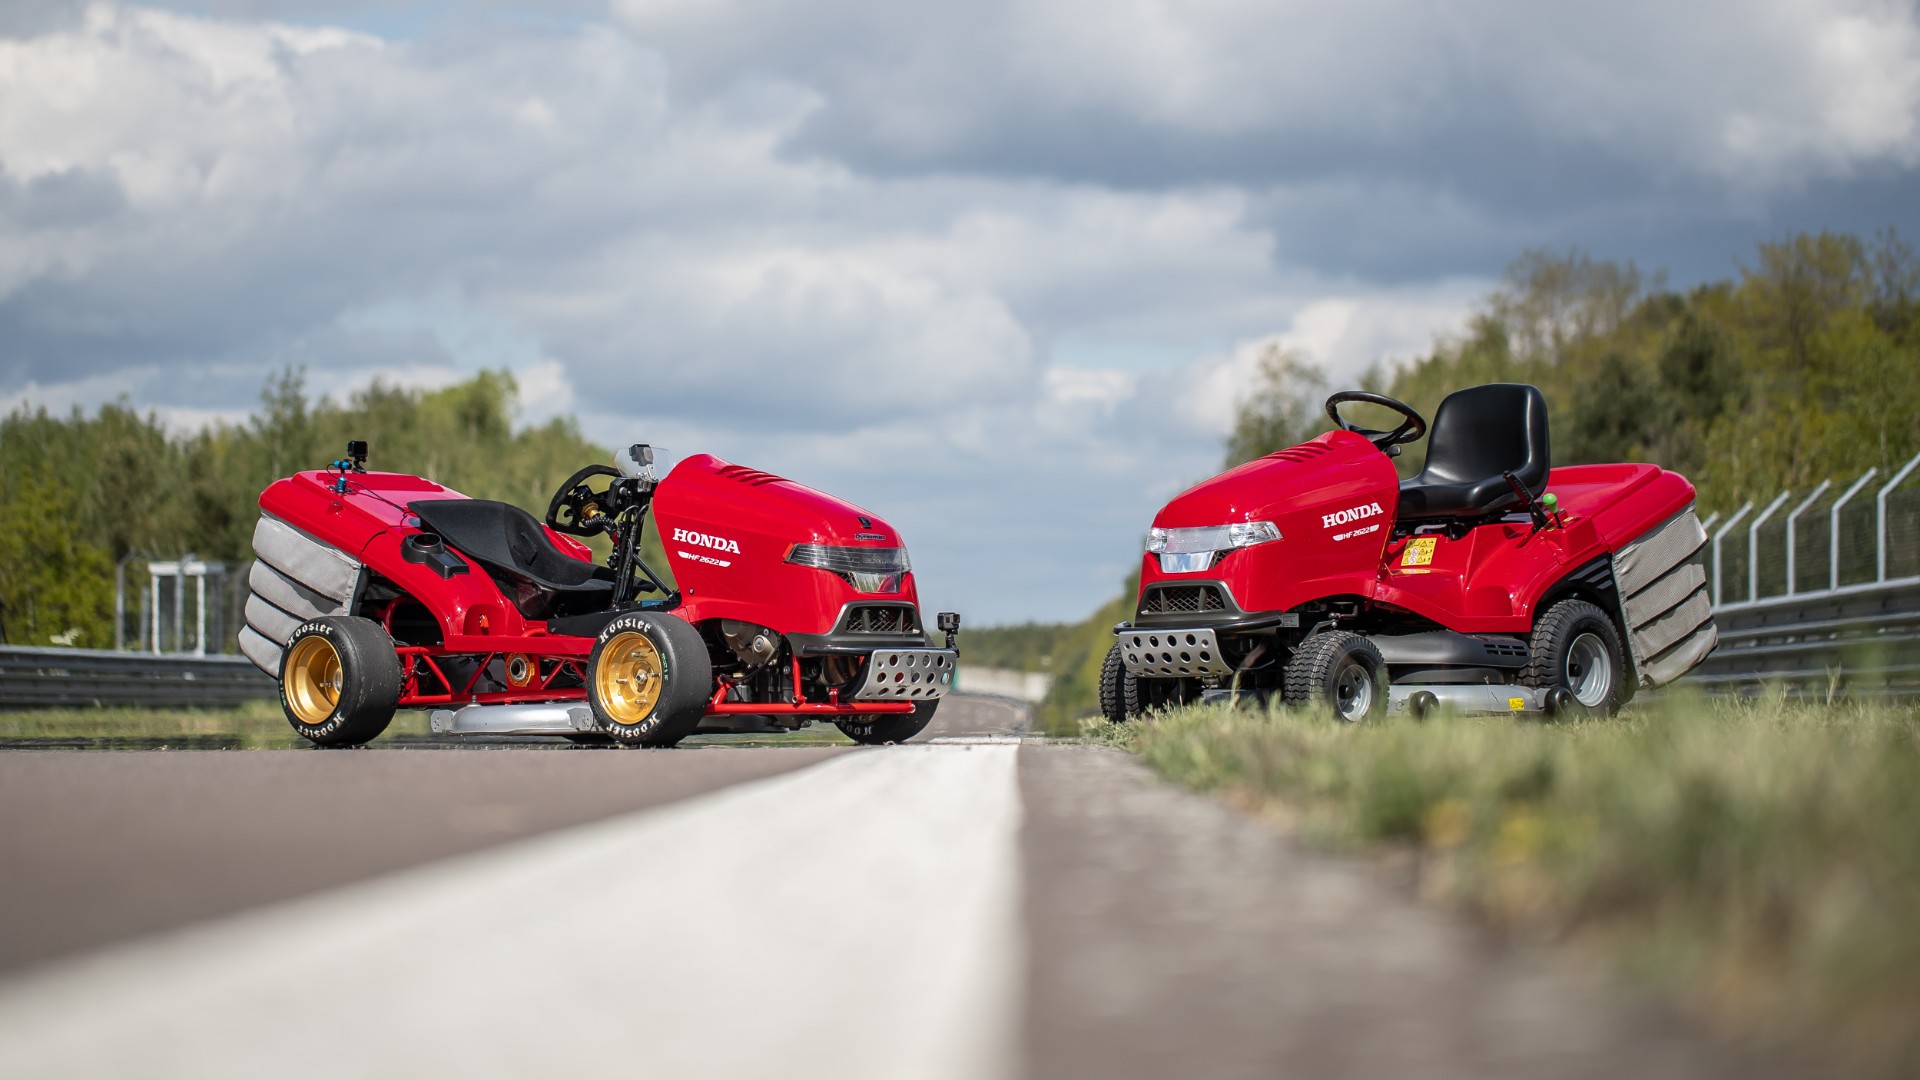 Honda's Mean Mower is the fastest lawnmower in the world